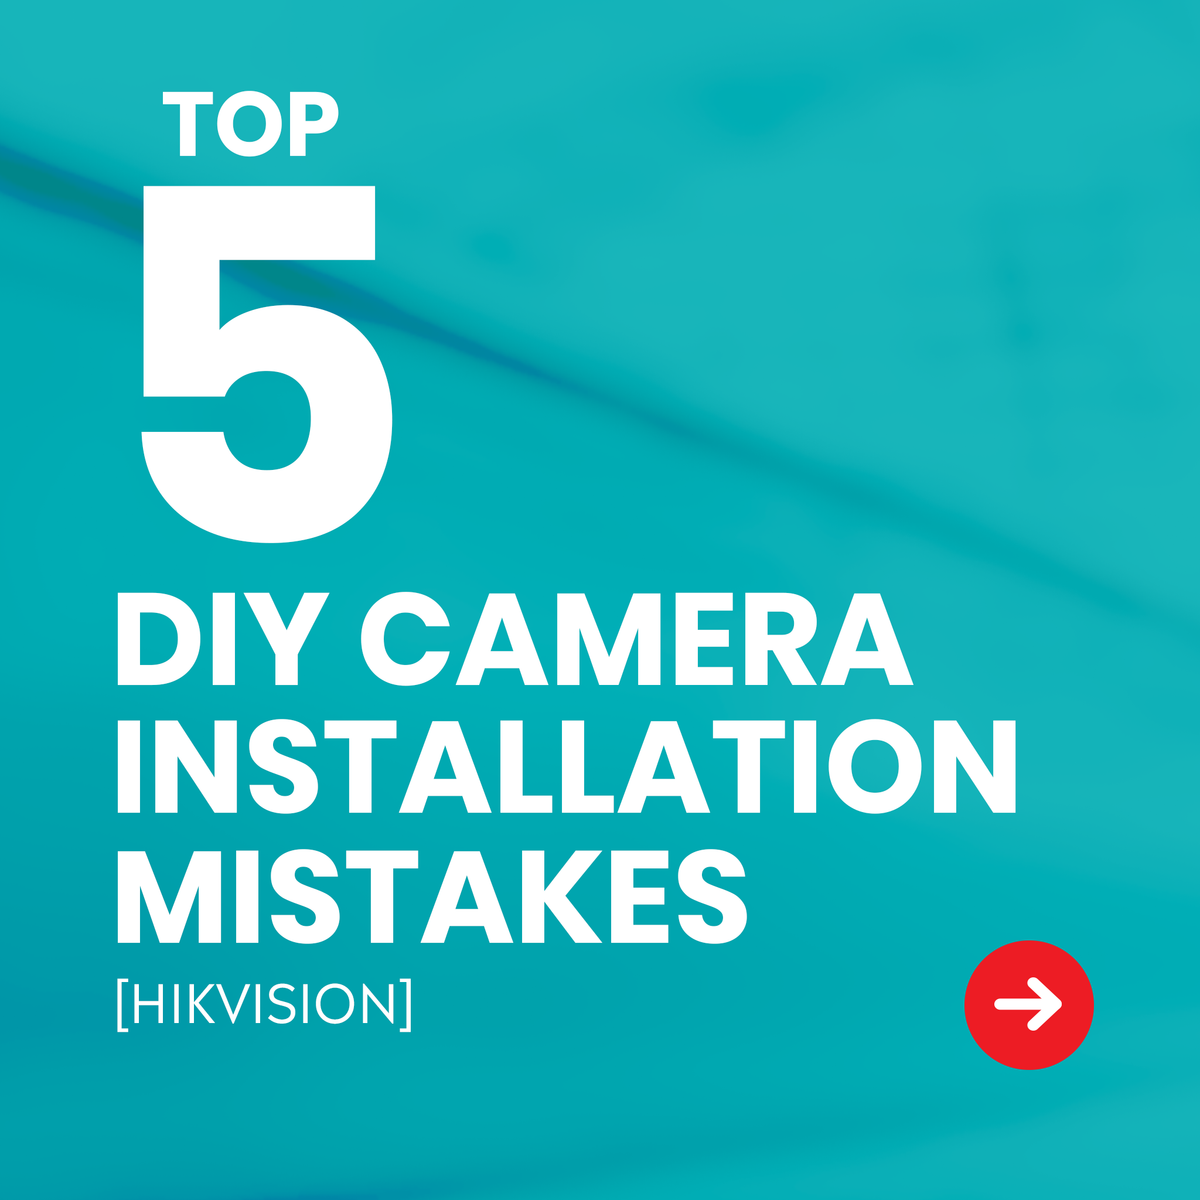 Top Five Mistakes When Installing a Hikvision Security Camera For The First Time